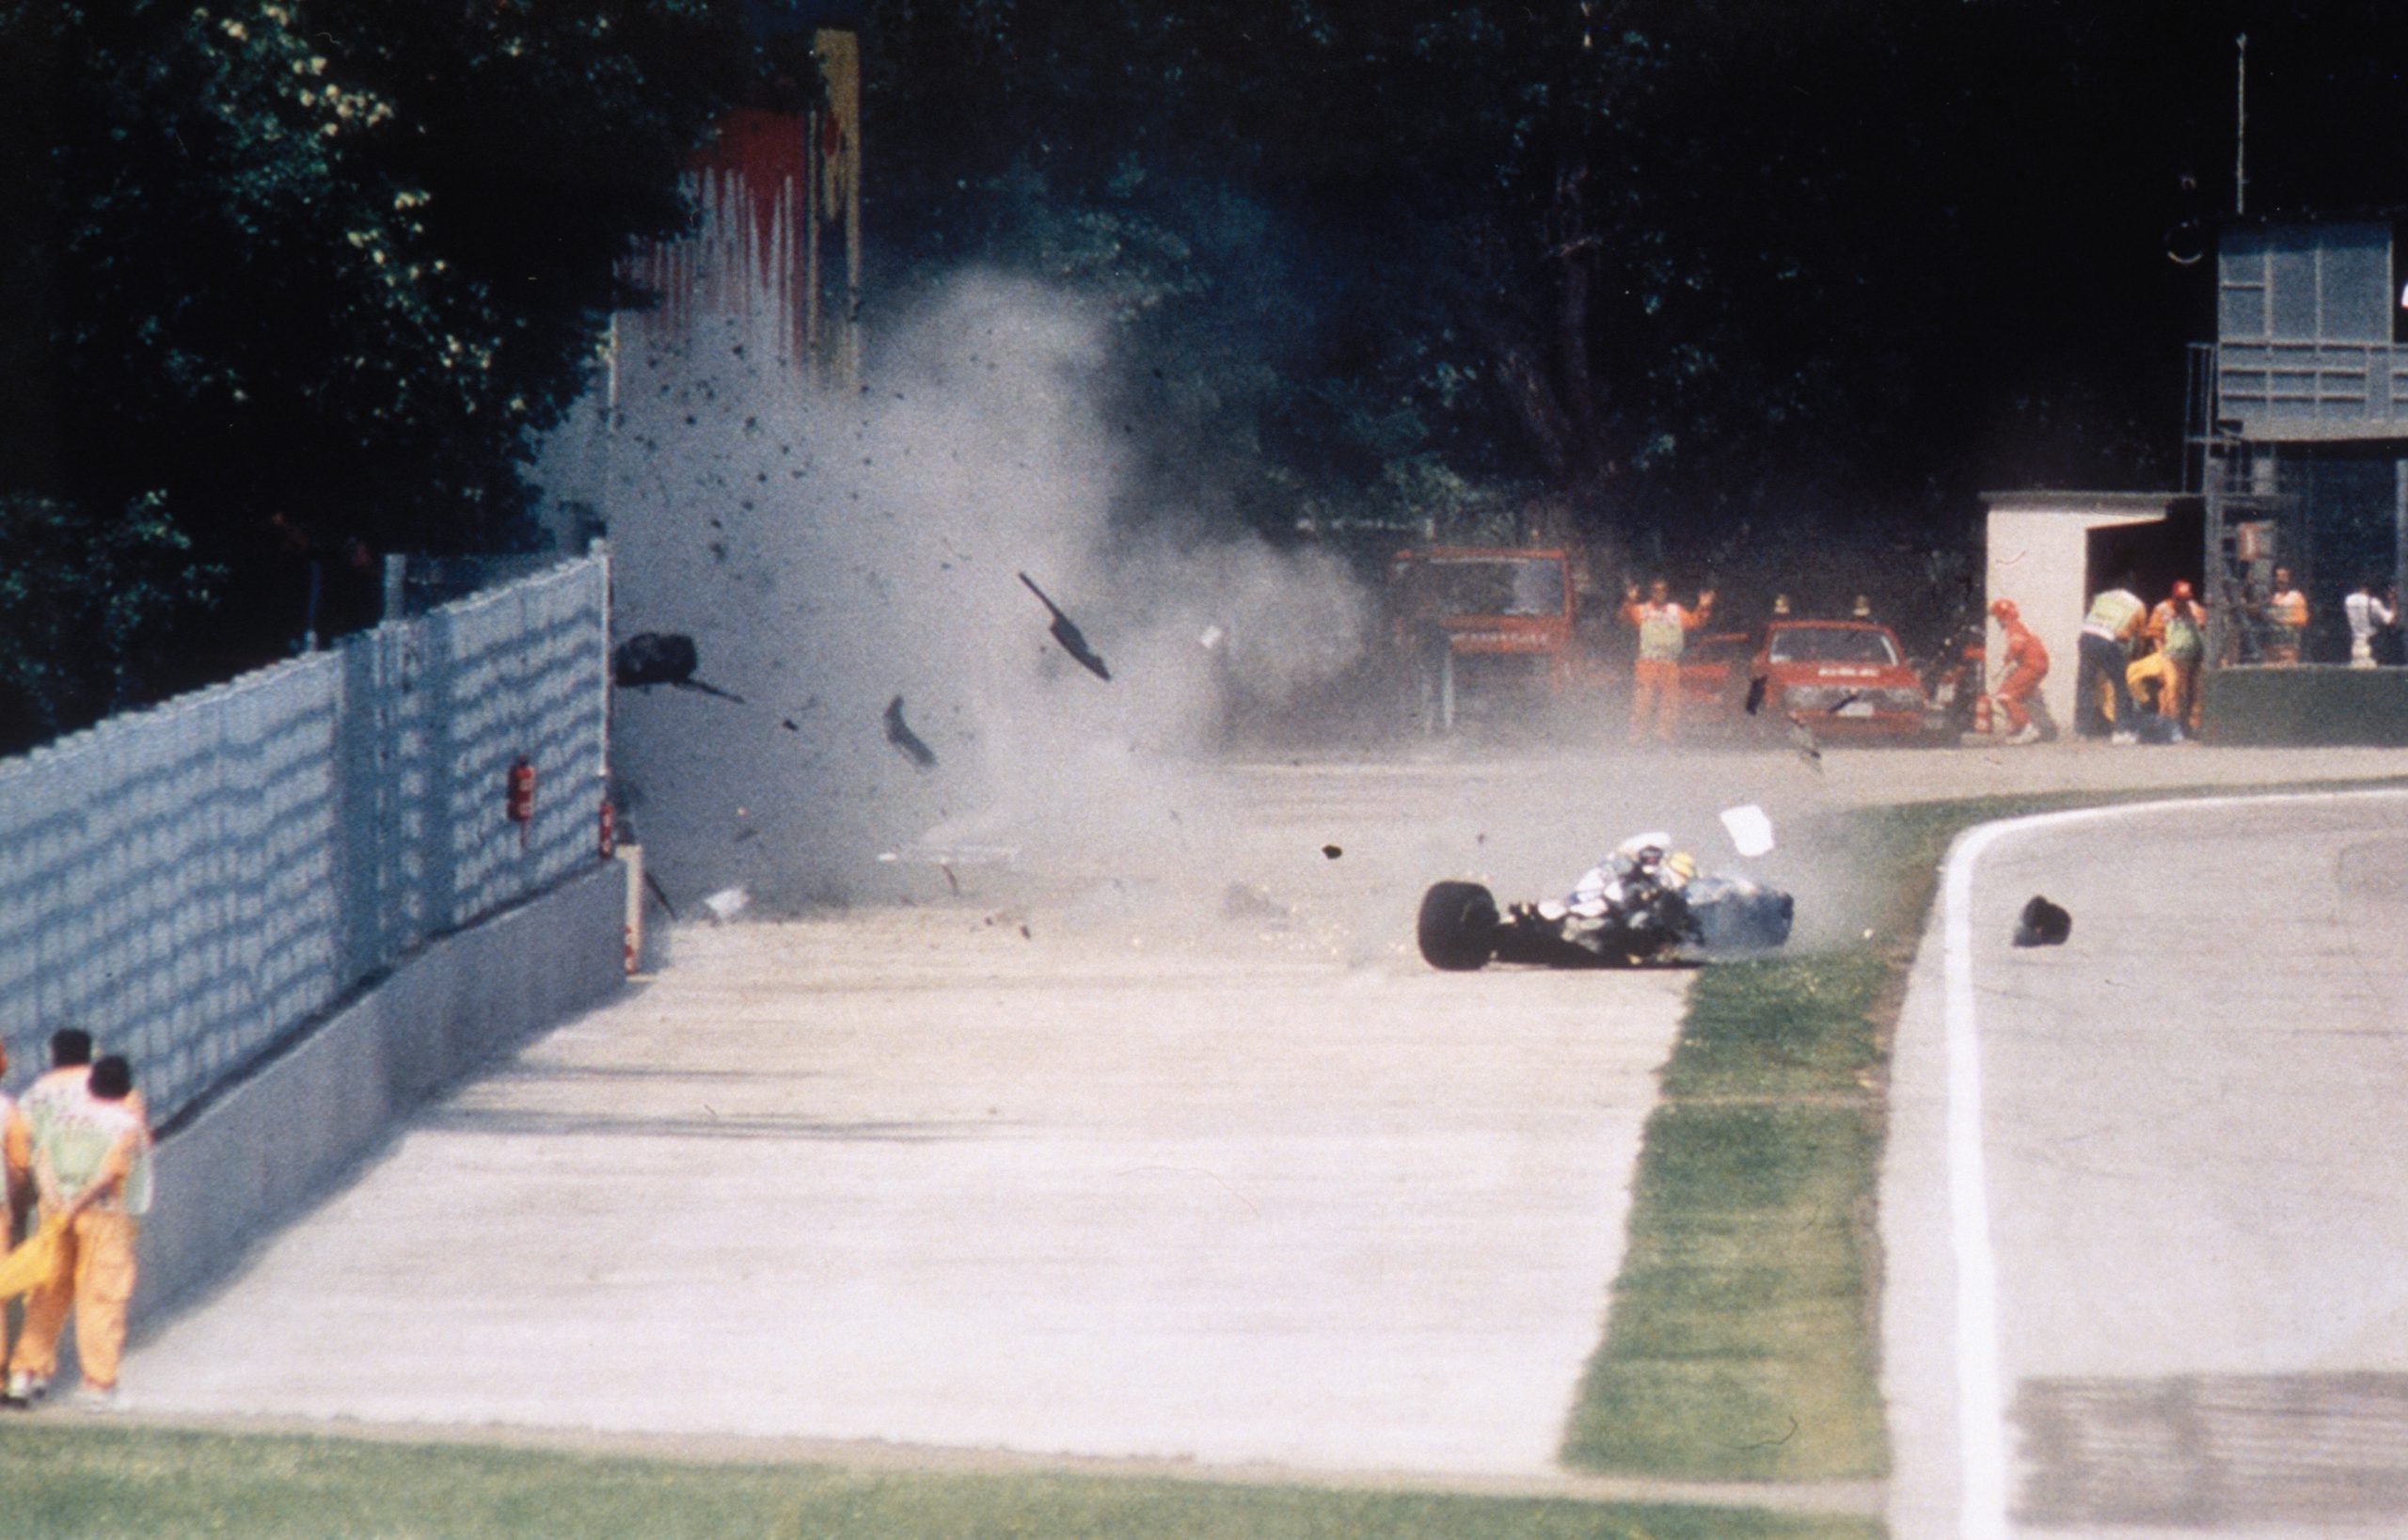 Ayrton Senna crashes into a wall during the 1994 San Marino Grand Prix in Imola, Italy. Senna later died at the Maggiore Hospital in Bologna. (Photo by Alberto Pizzoli/Sygma/Sygma via Getty Images)